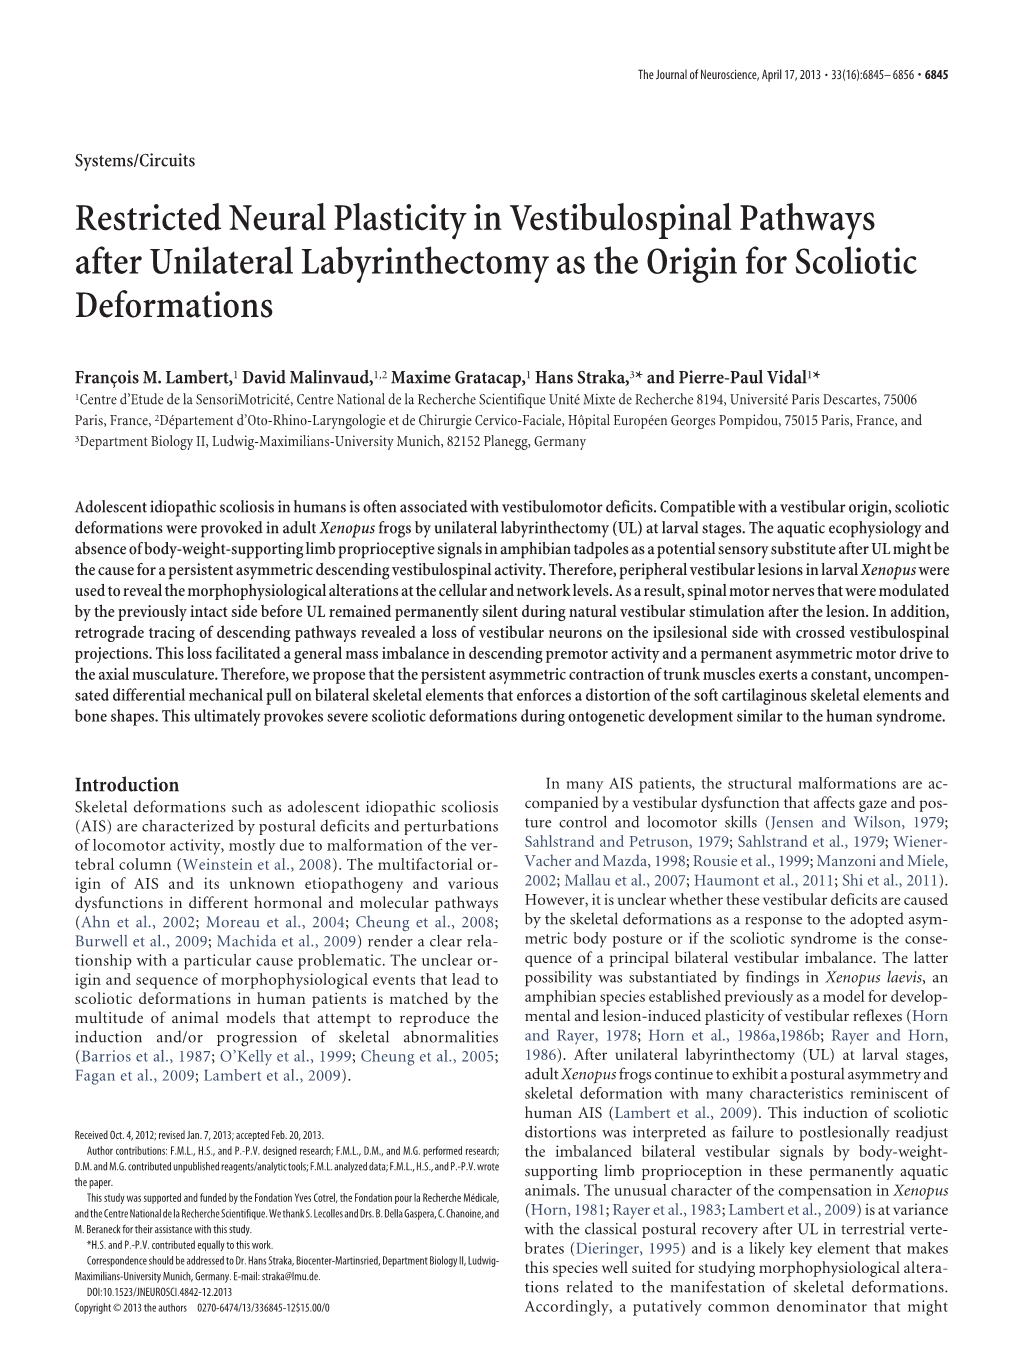 Restricted Neural Plasticity in Vestibulospinal Pathways After Unilateral Labyrinthectomy As the Origin for Scoliotic Deformations